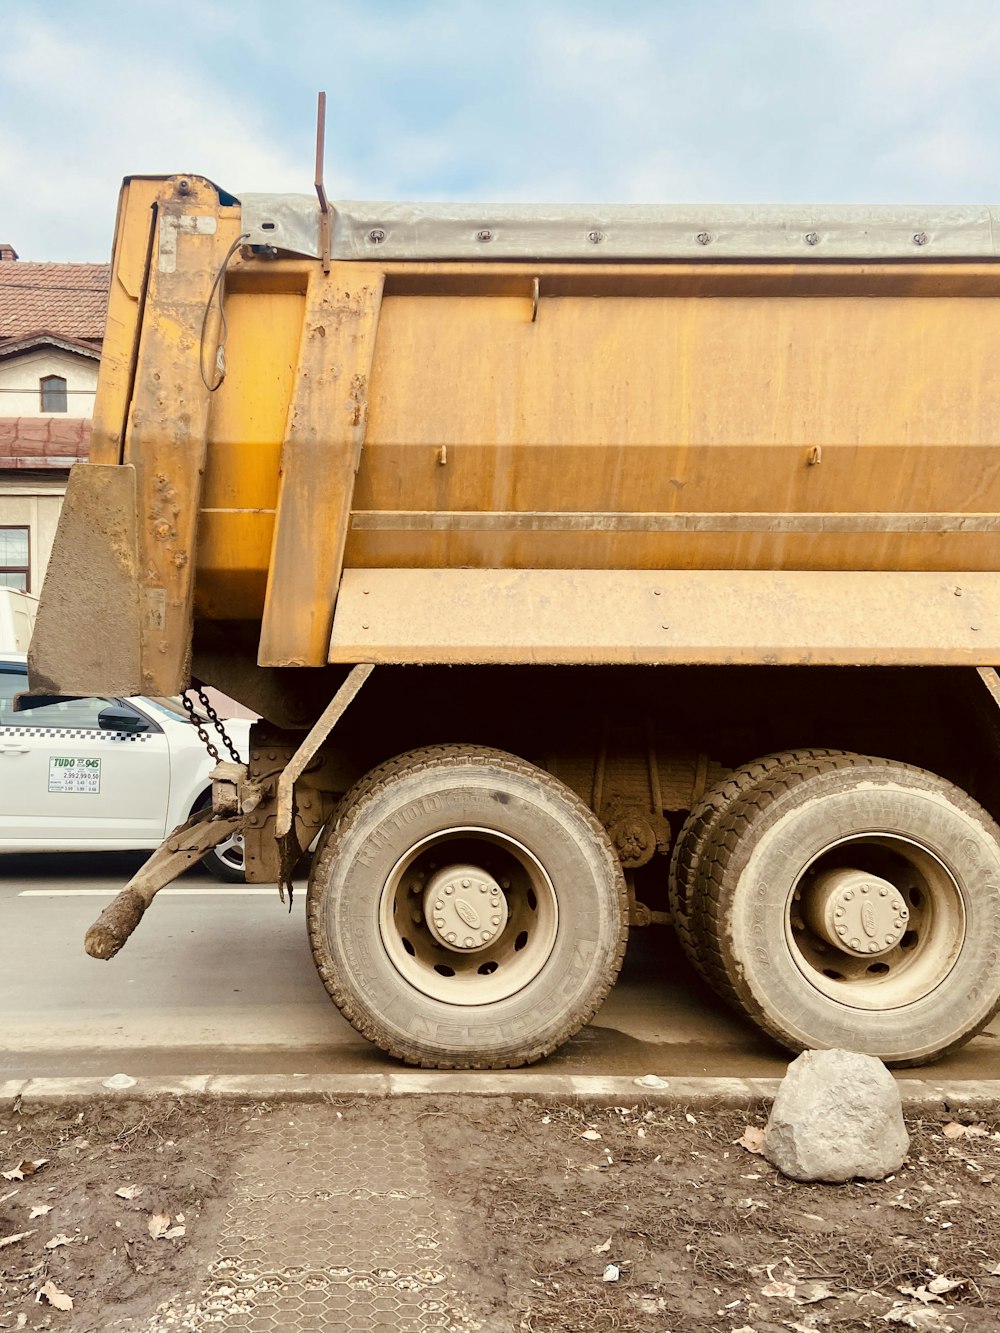 a dump truck parked on the side of the road